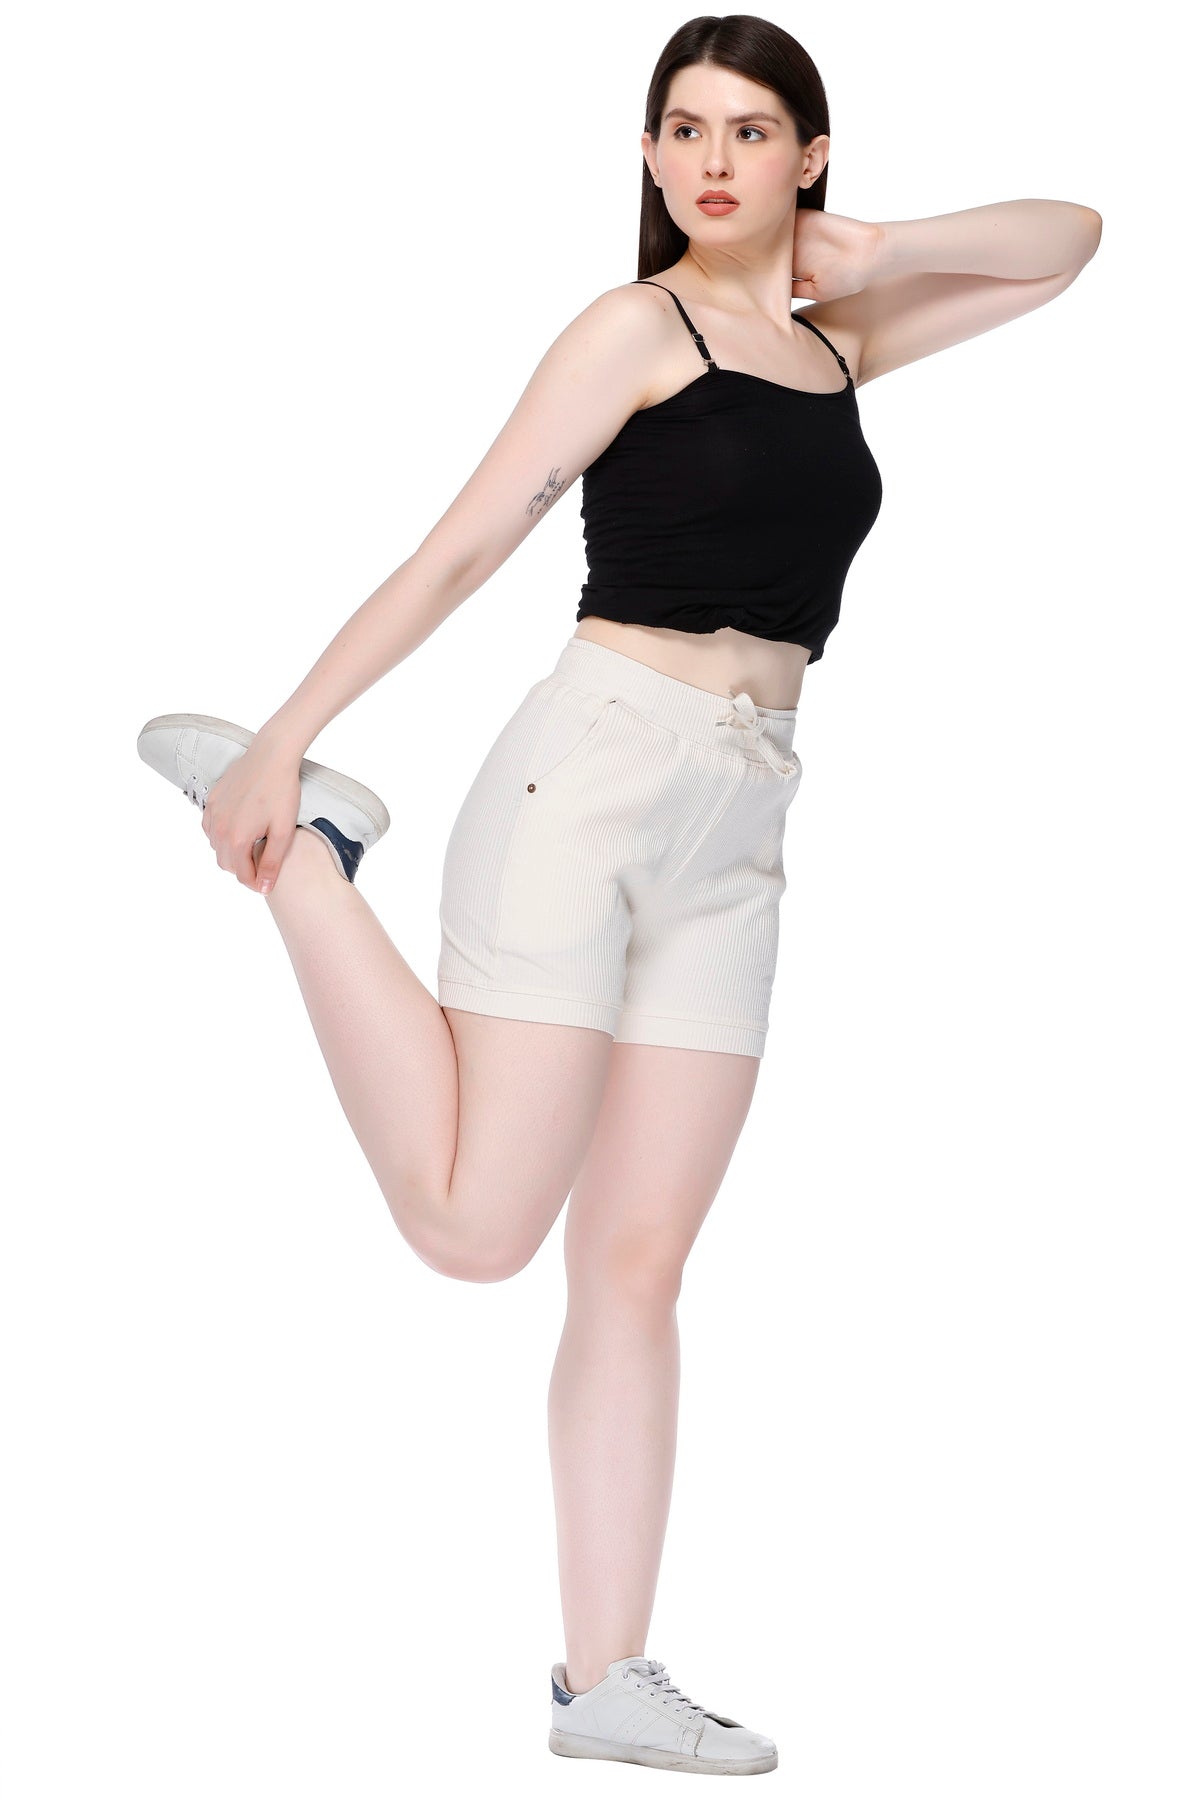 Comfortable Cotton Shorts For Women Combo (White/Tangy Orange) Online In India